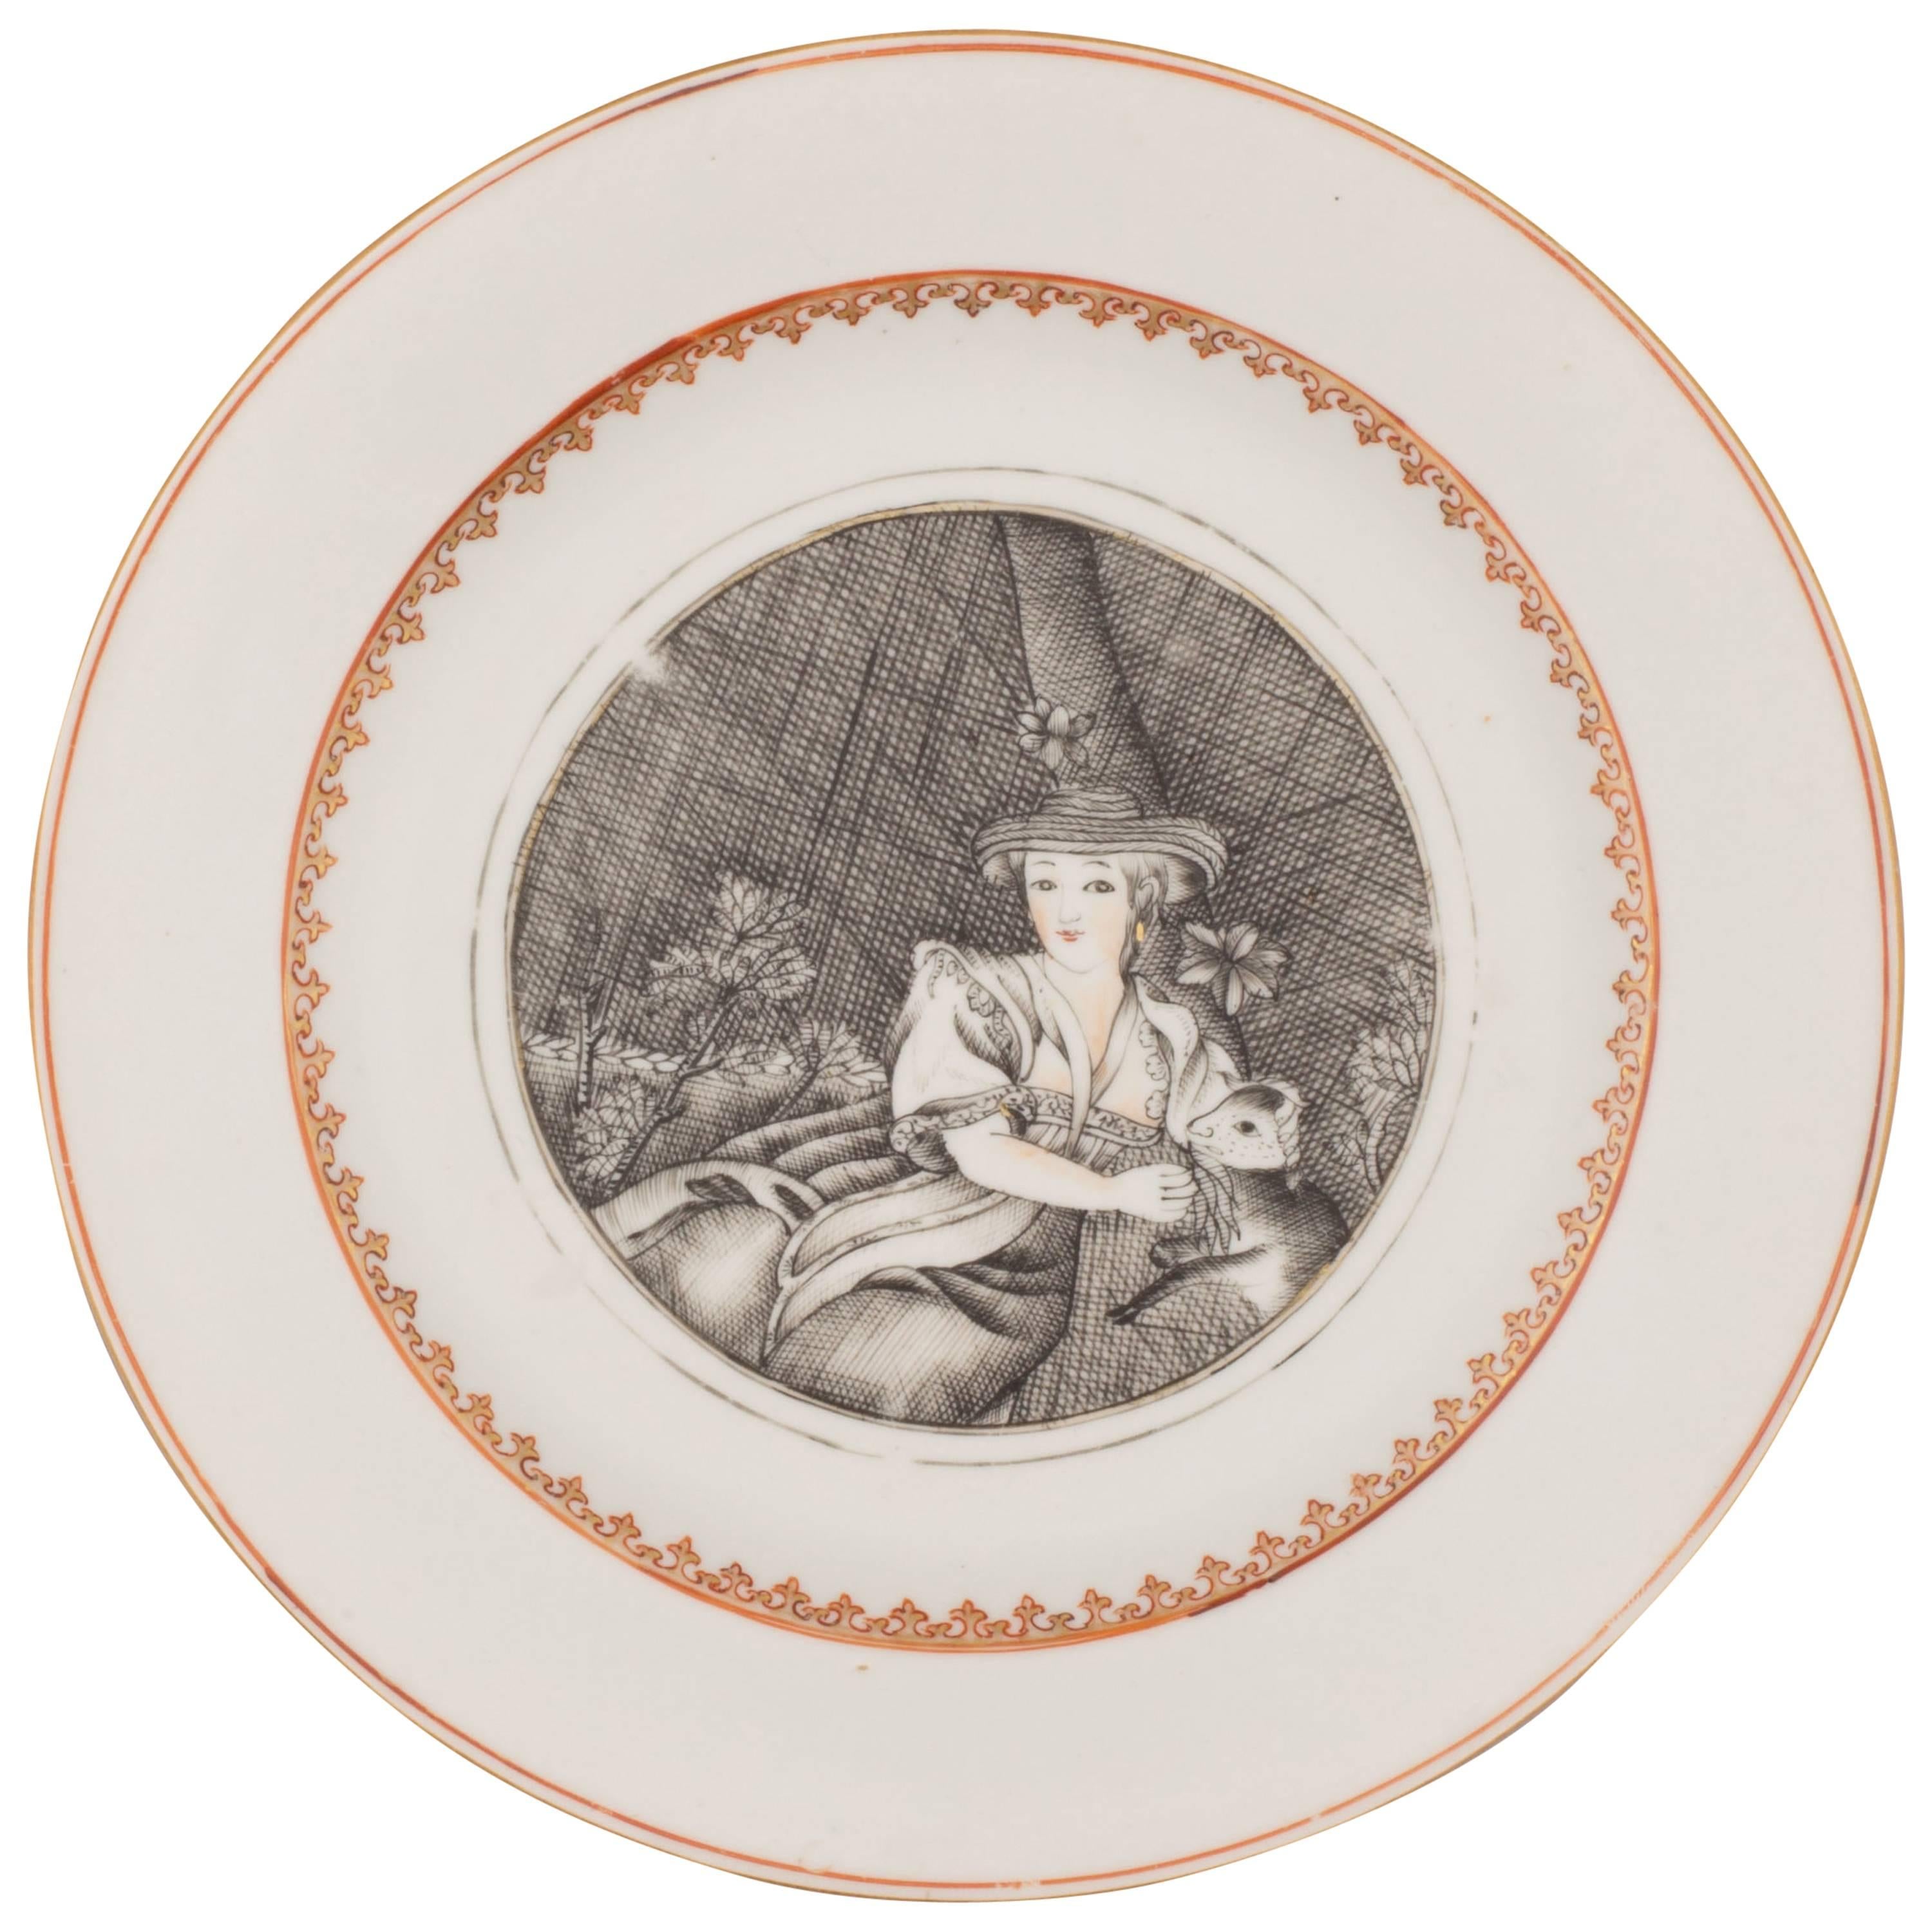 Chinese Porcelain Plate Decorated in Grisaille with a Shepherdess, 18th Century